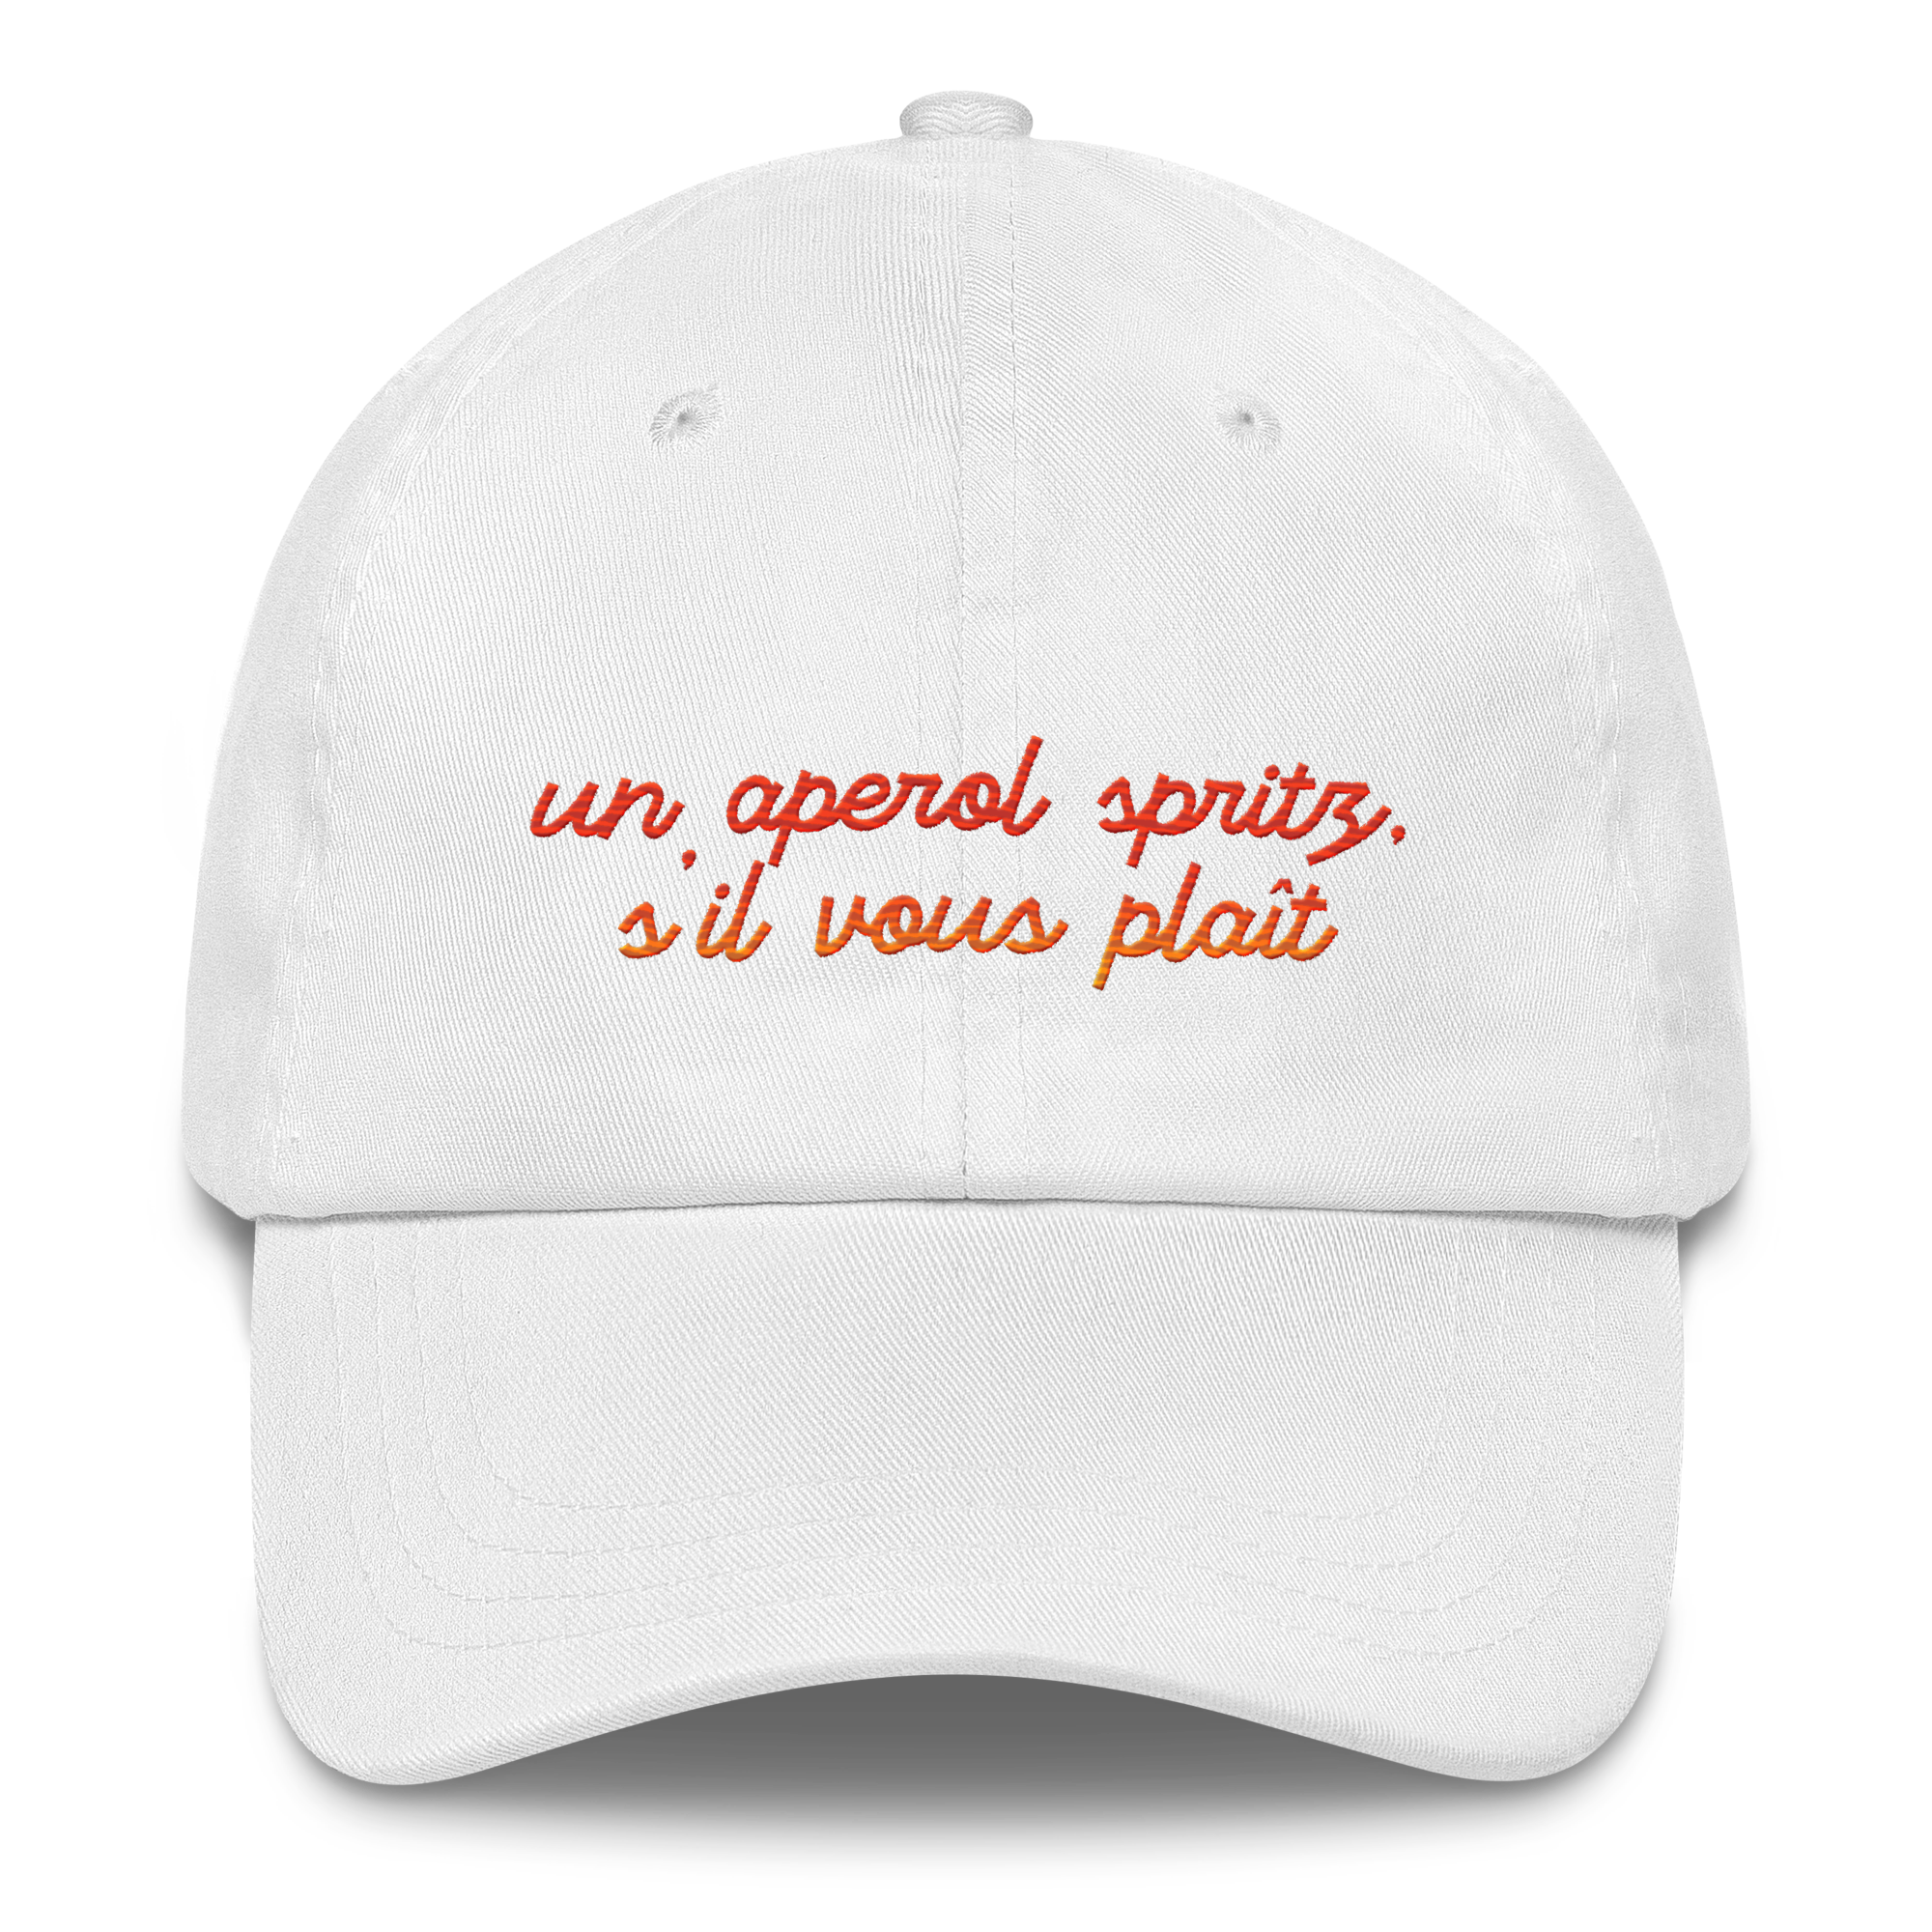 classic-dad-hat-white-front-6671b383d02fb.png